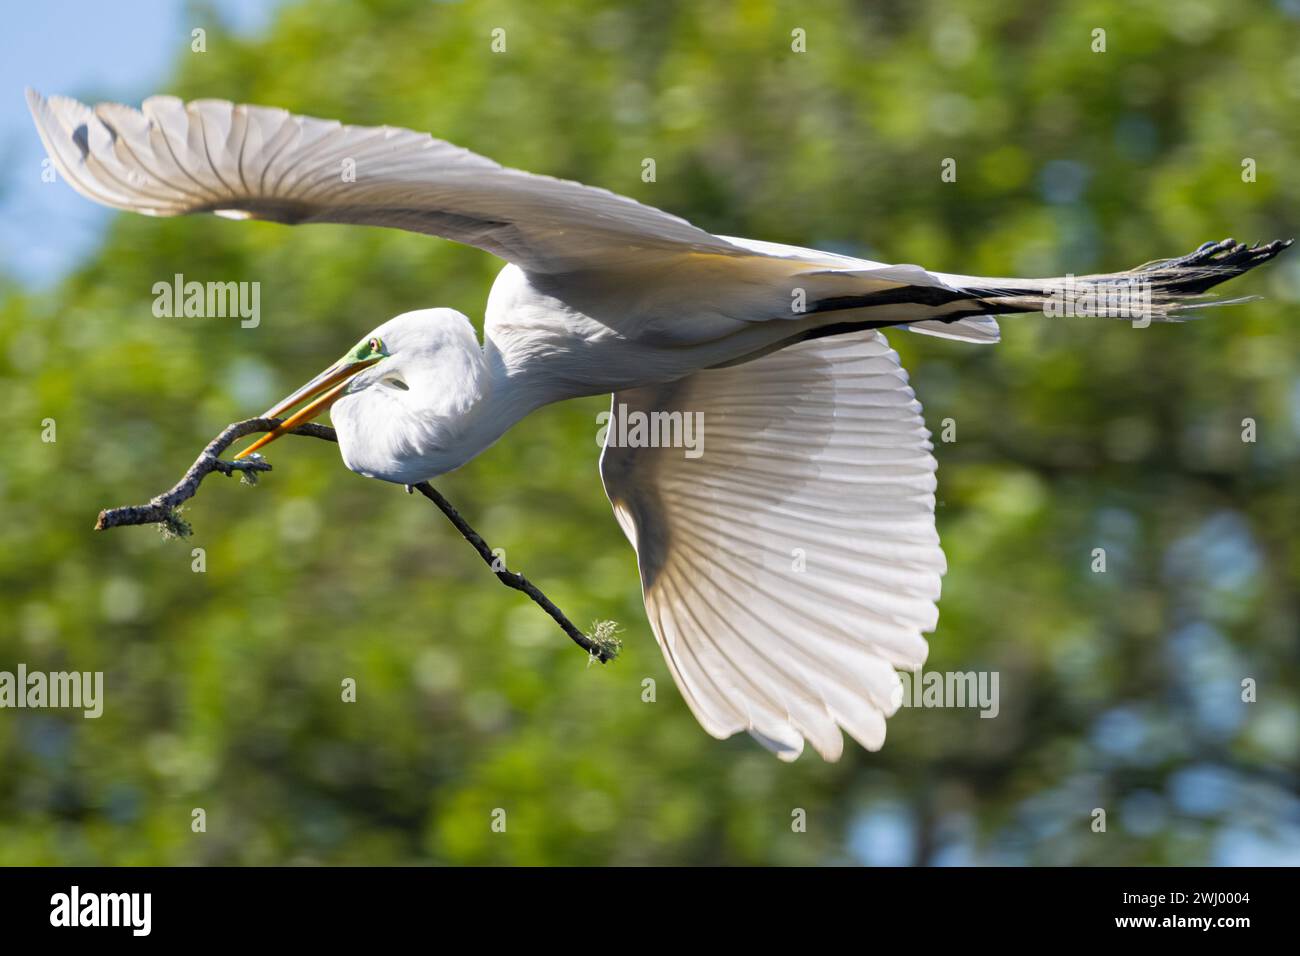 Great egret (Ardea alba) in flight with a large stick for nest building during breeding season in St. Augustine, Florida. (USA) Stock Photo